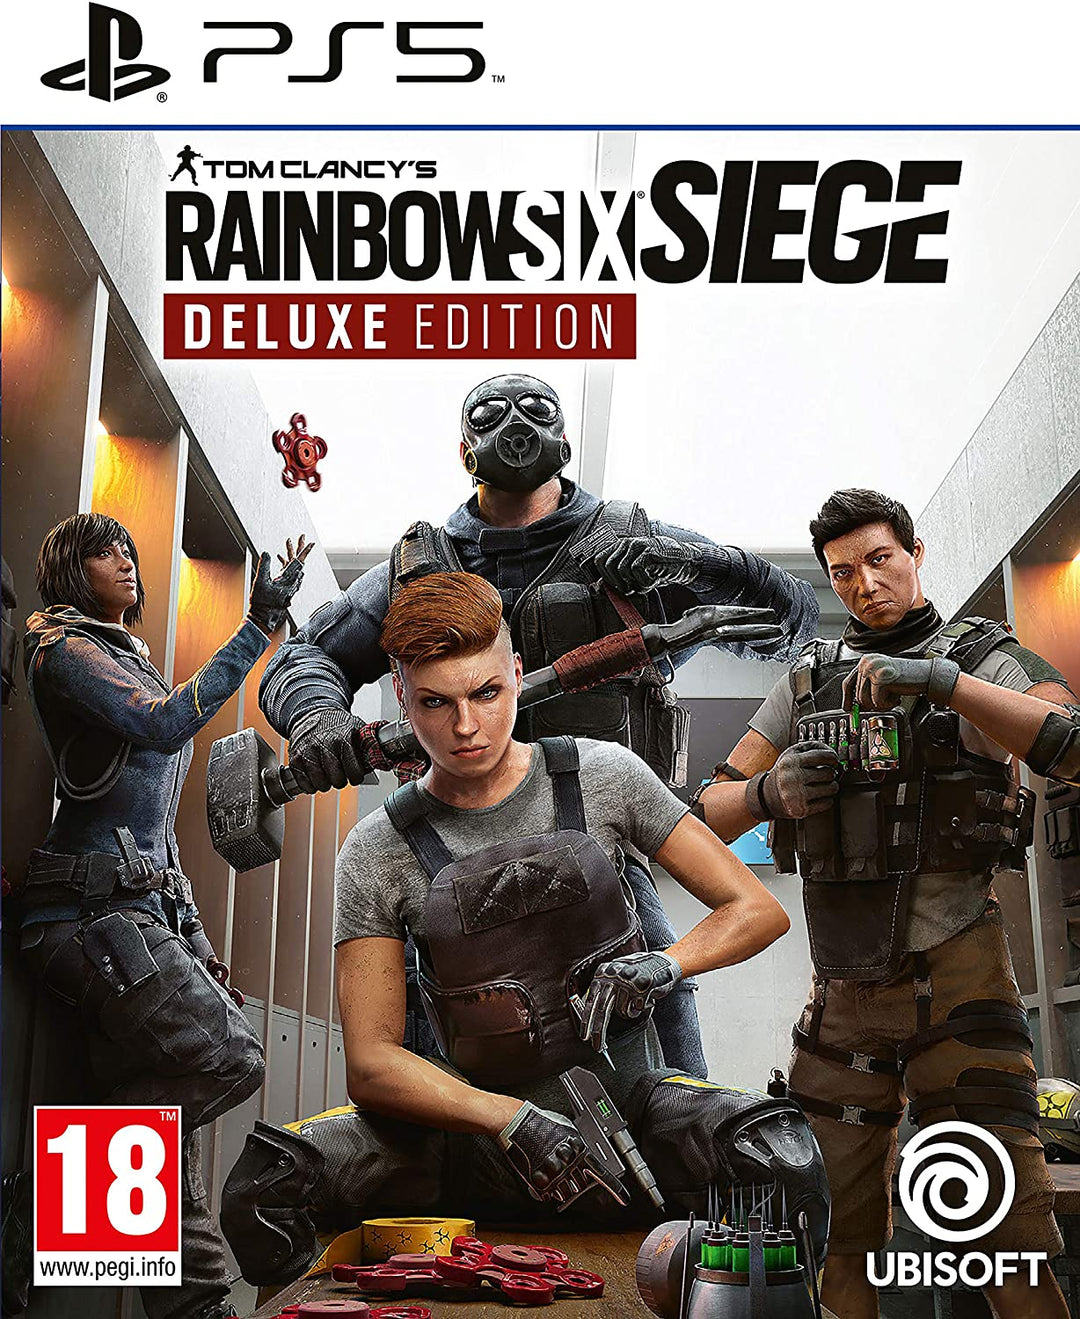 Tom Clancy’s Rainbow Six Siege – Deluxe Edition (PS5)